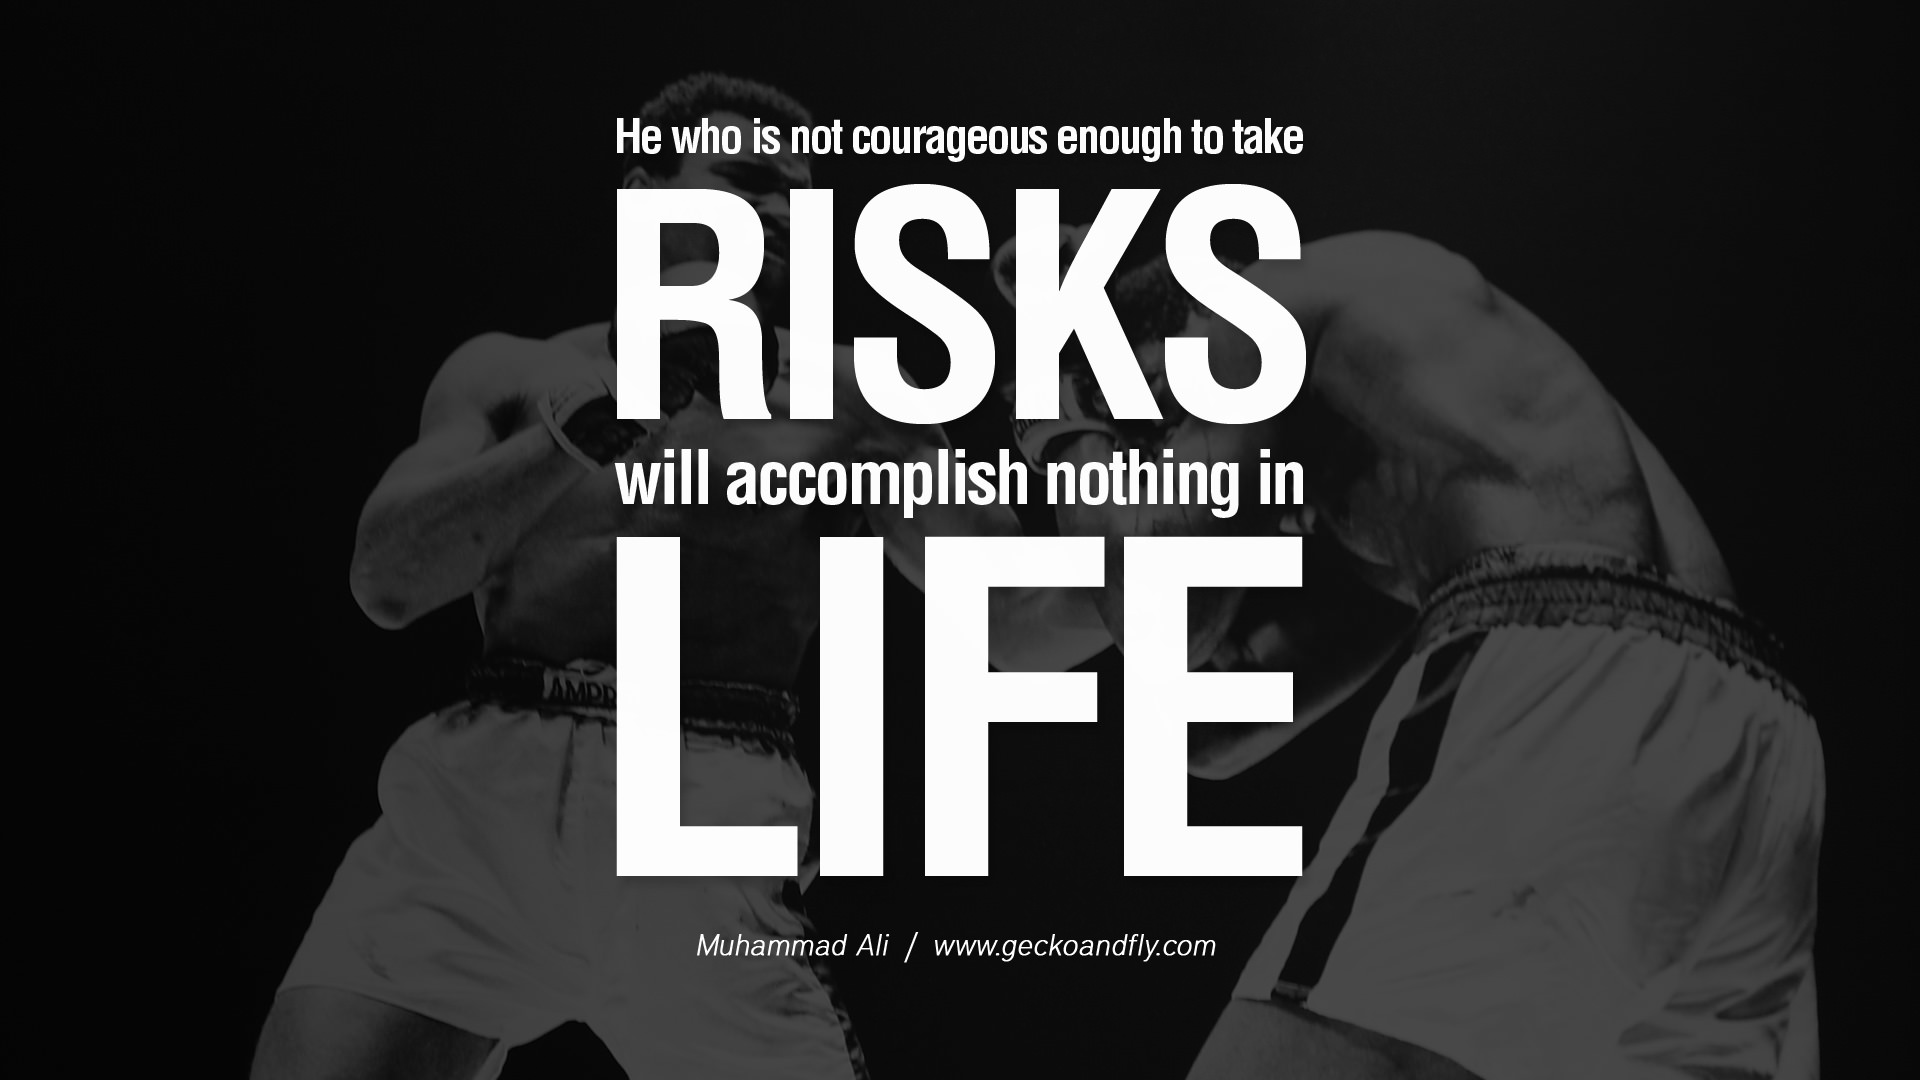 he who is not courageous enough to take risks will accomplish nothing in life muhammad ali quote